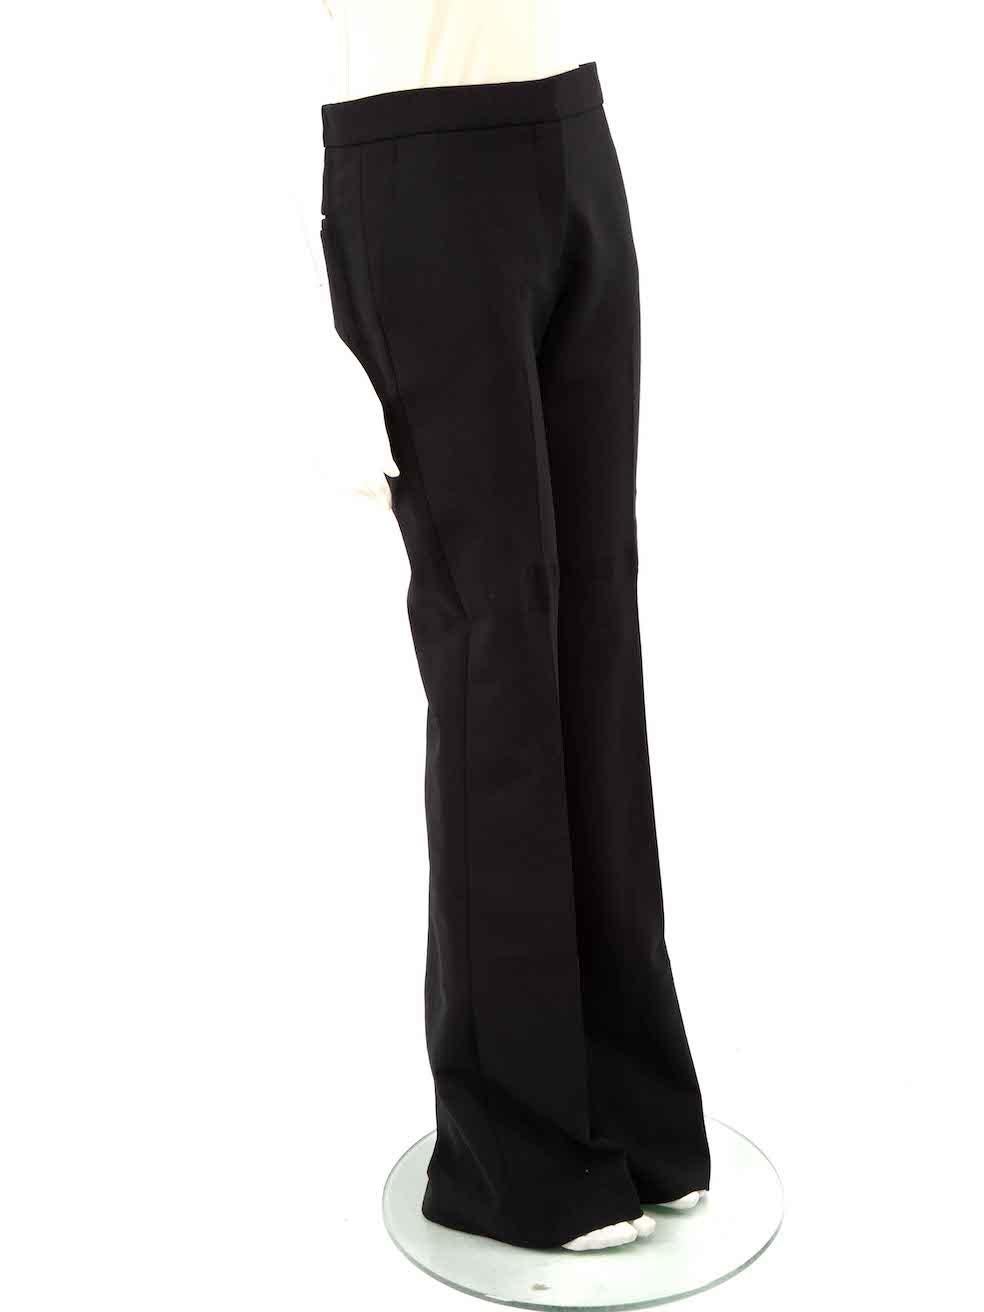 CONDITION is Very good. Minimal wear to trousers is evident. Minimal wear to the right leg backside with a pull to weave. No brand label on this used Victoria Beckham designer resale item.
 
 
 
 Details
 
 
 Black
 
 Wool
 
 Flared trousers
 
 Mid